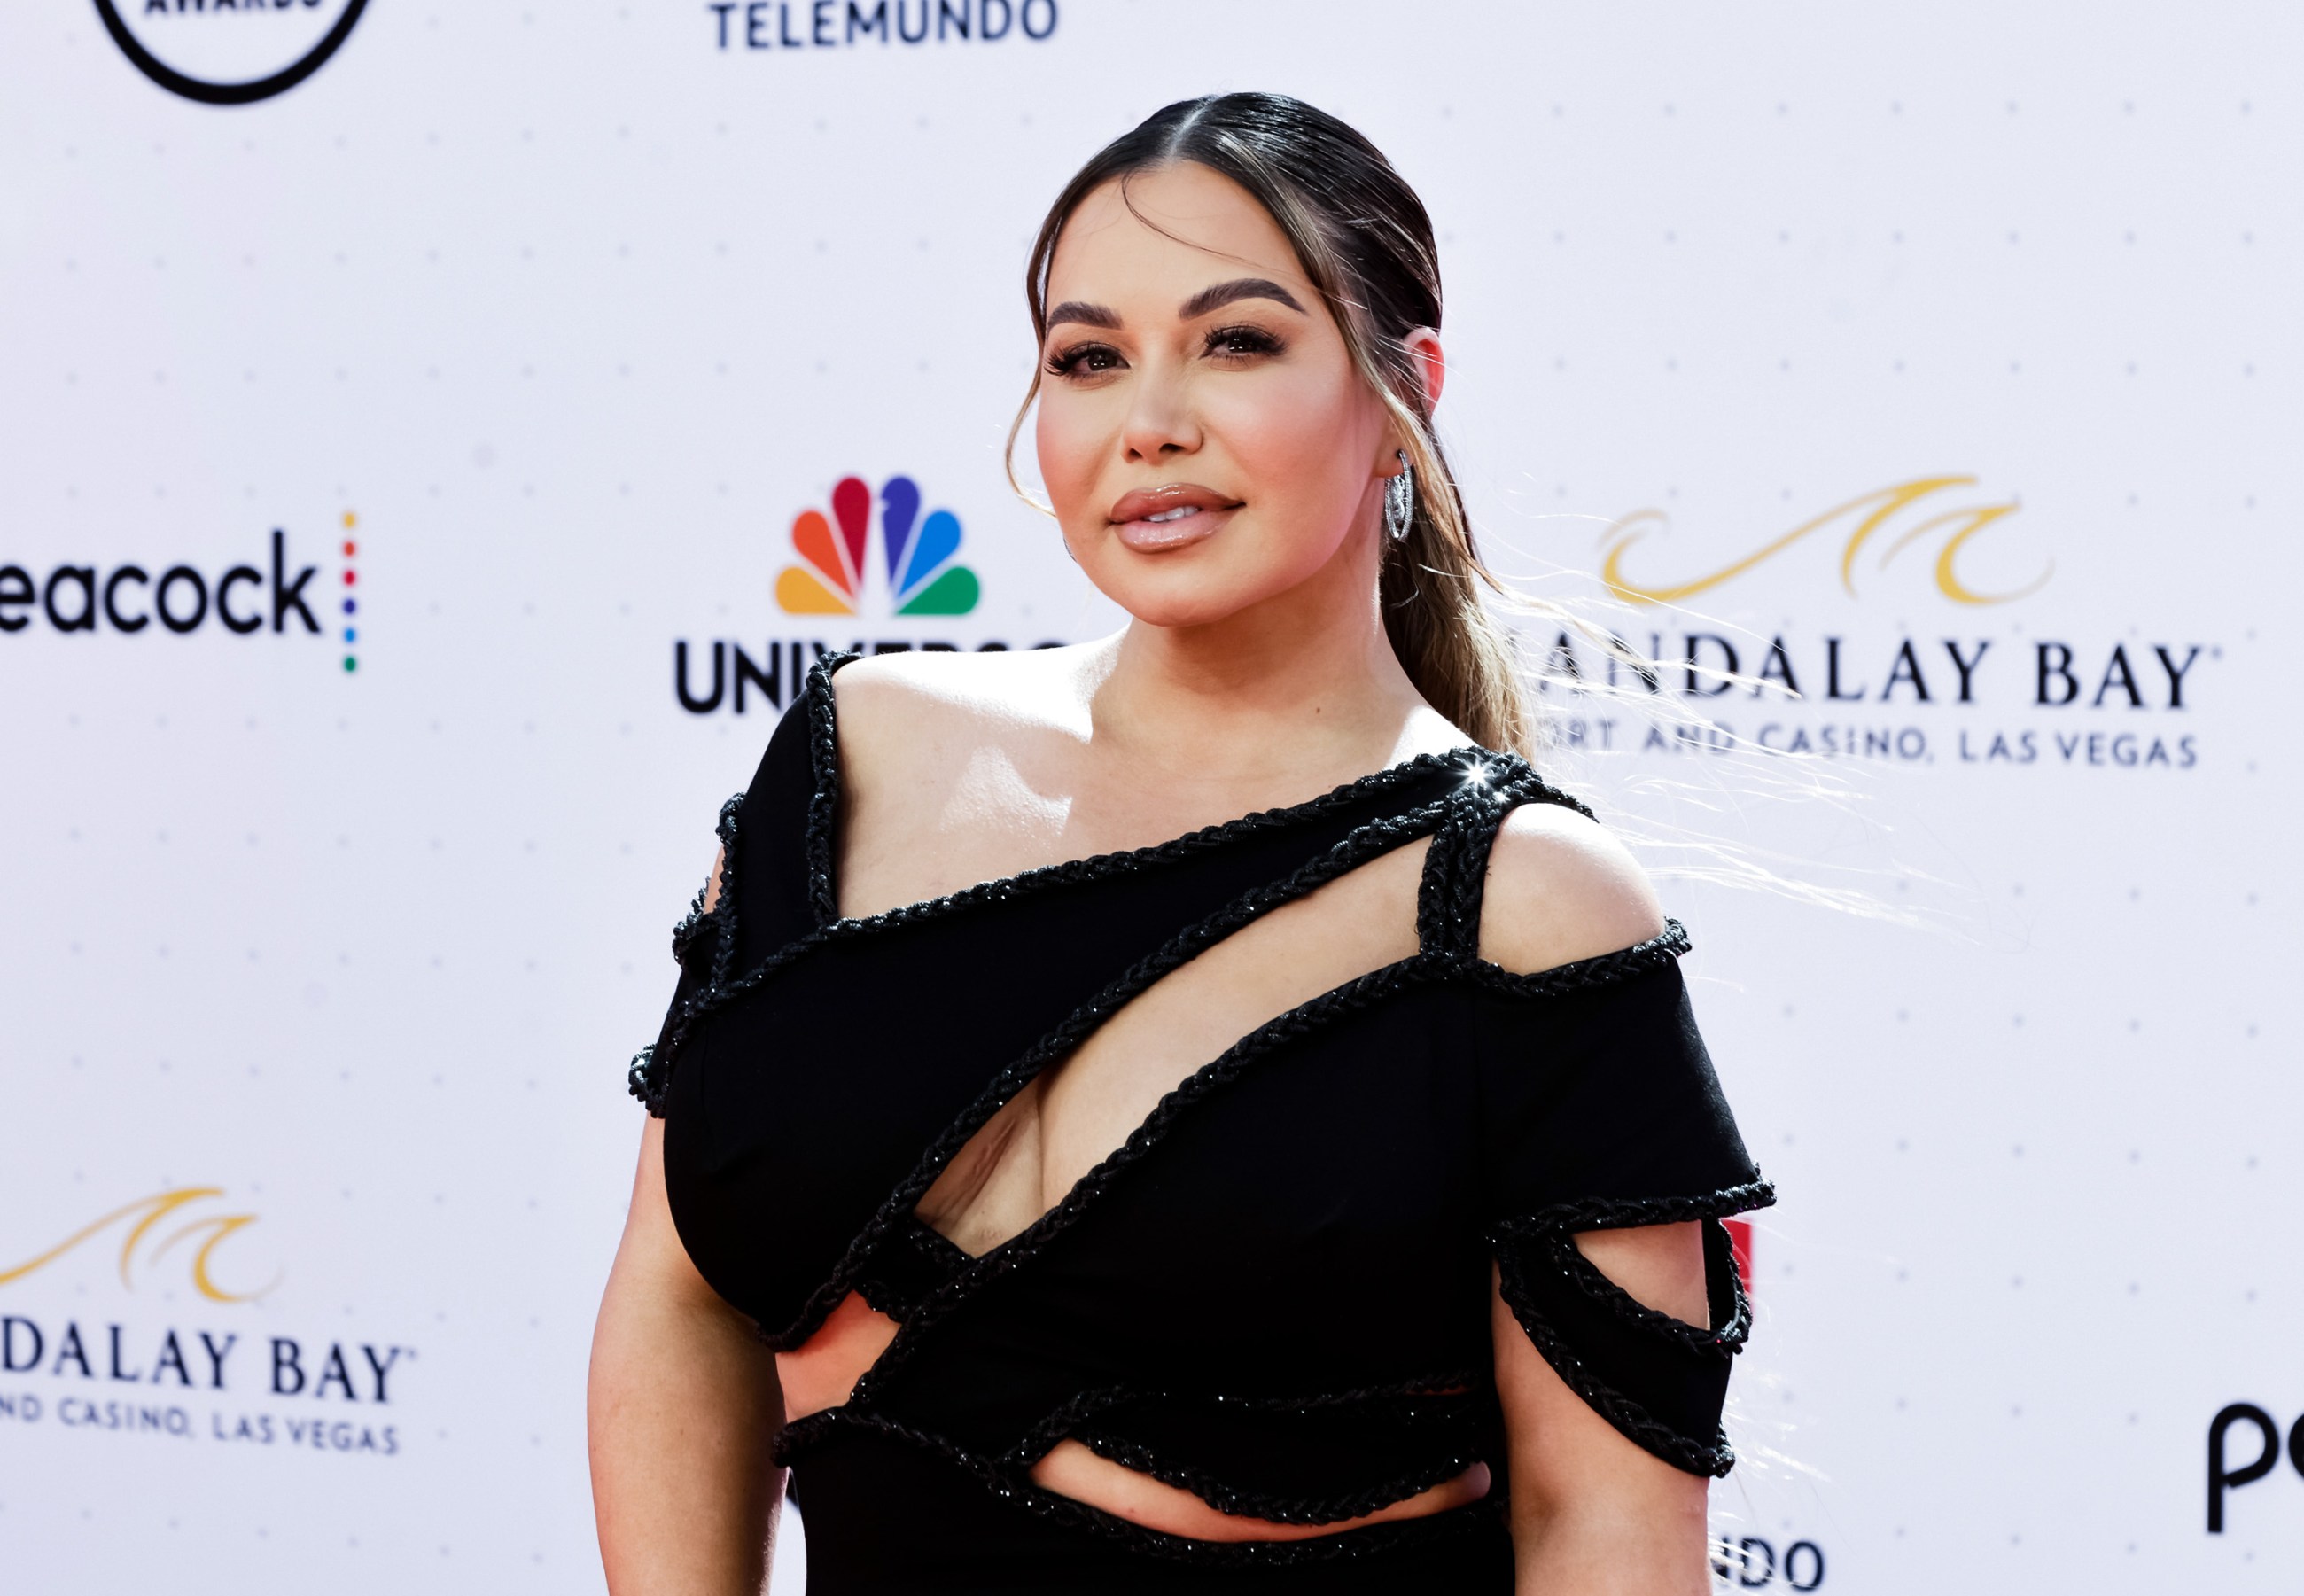 Heart to heart convos with your siblings hit different 💙 On today's e, chiquis  rivera monterrey